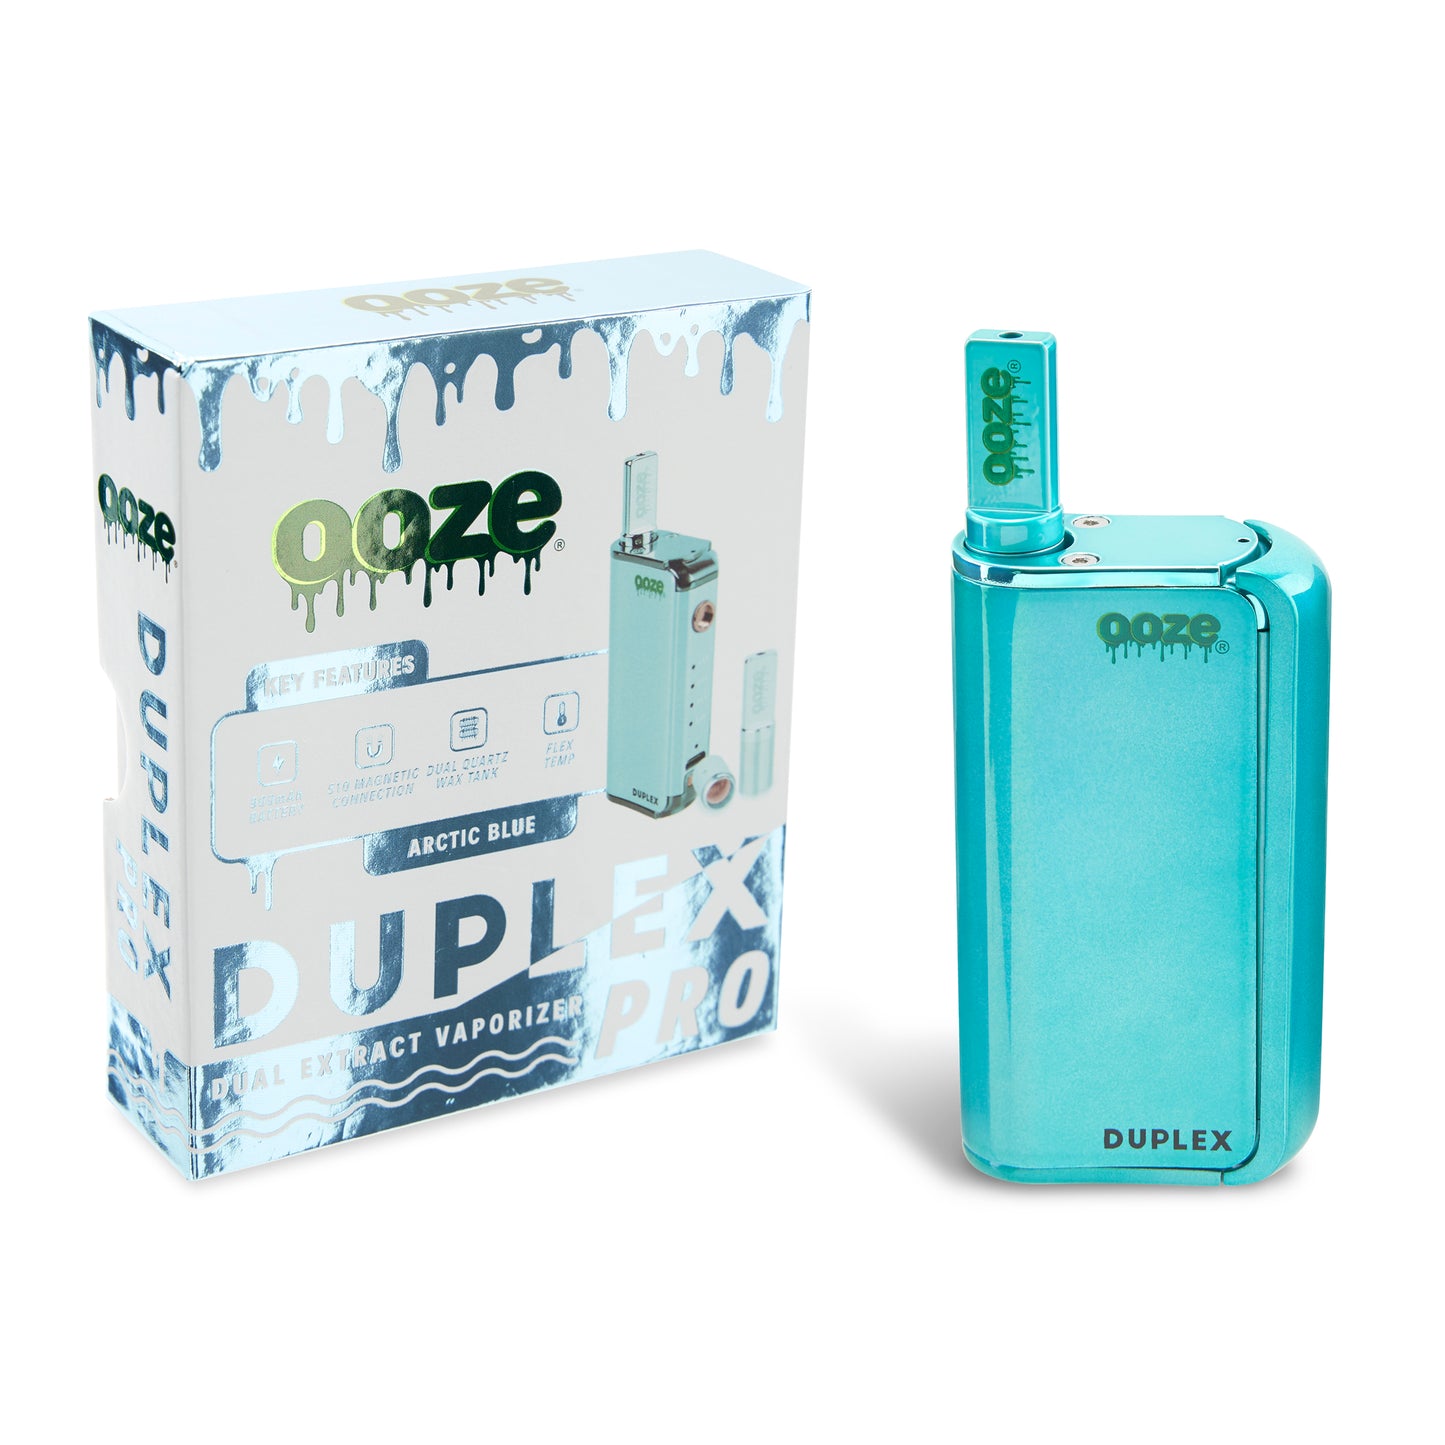 The Arctic Blue Ooze Duplex Pro Vaporizer is shown next to the packaging with the wax tank inserted.